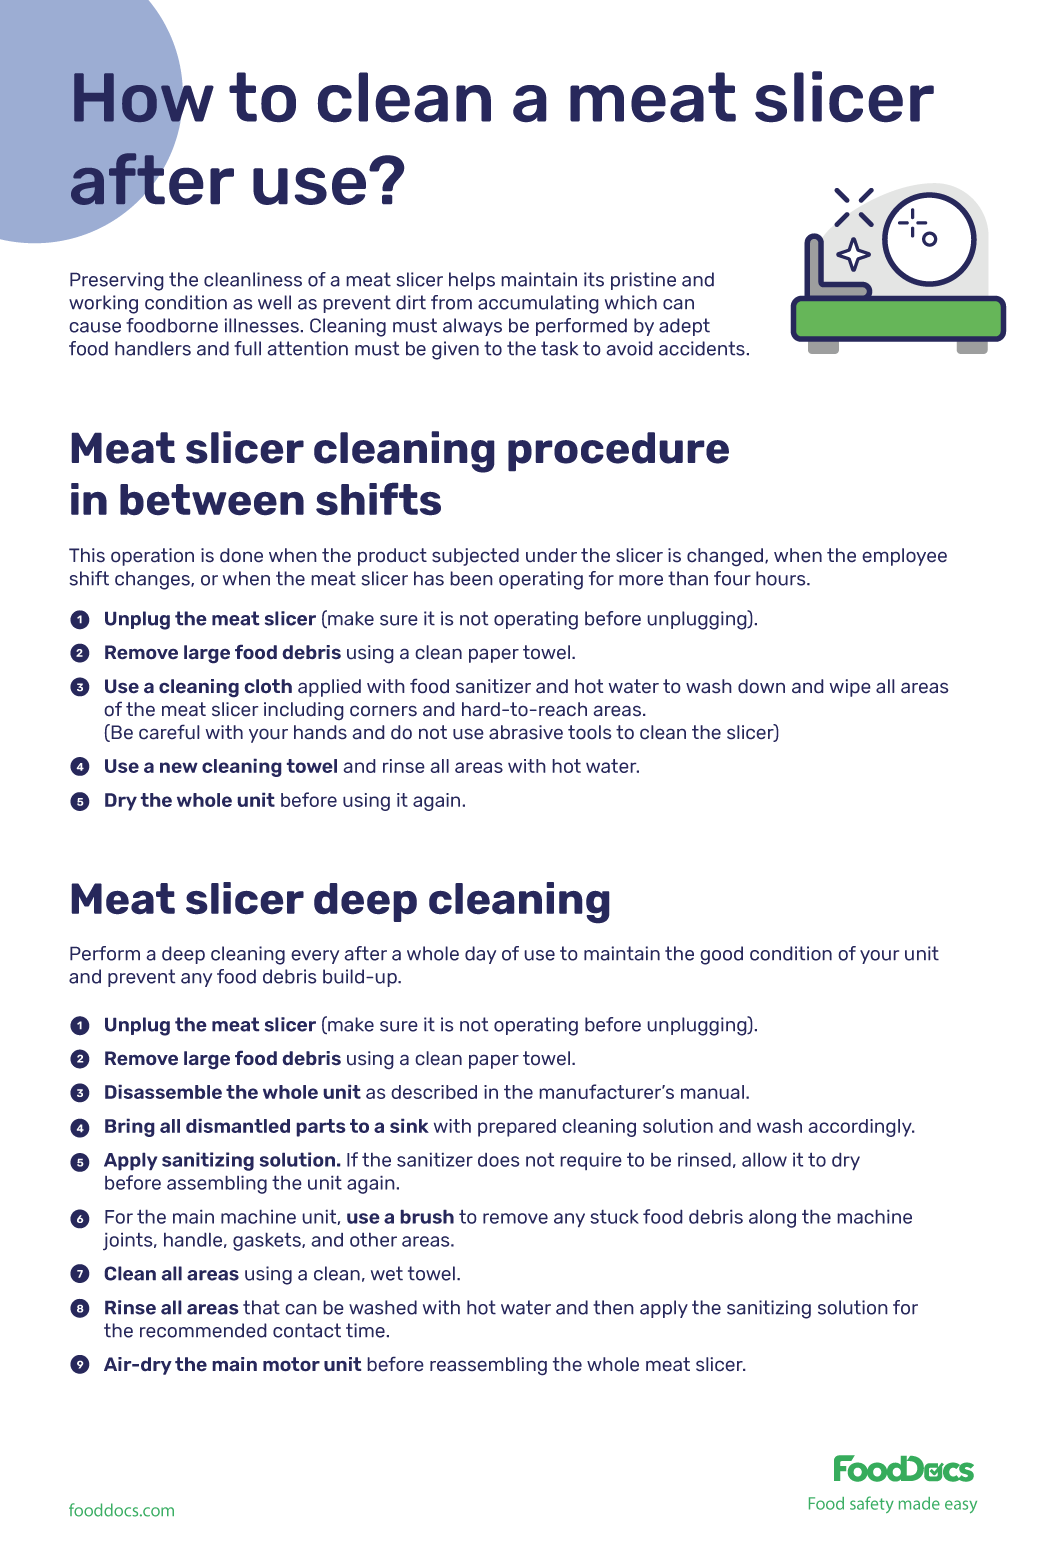 https://5845715.fs1.hubspotusercontent-na1.net/hub/5845715/hubfs/how%20to%20clean%20a%20meat%20slicer%20after%20use.png